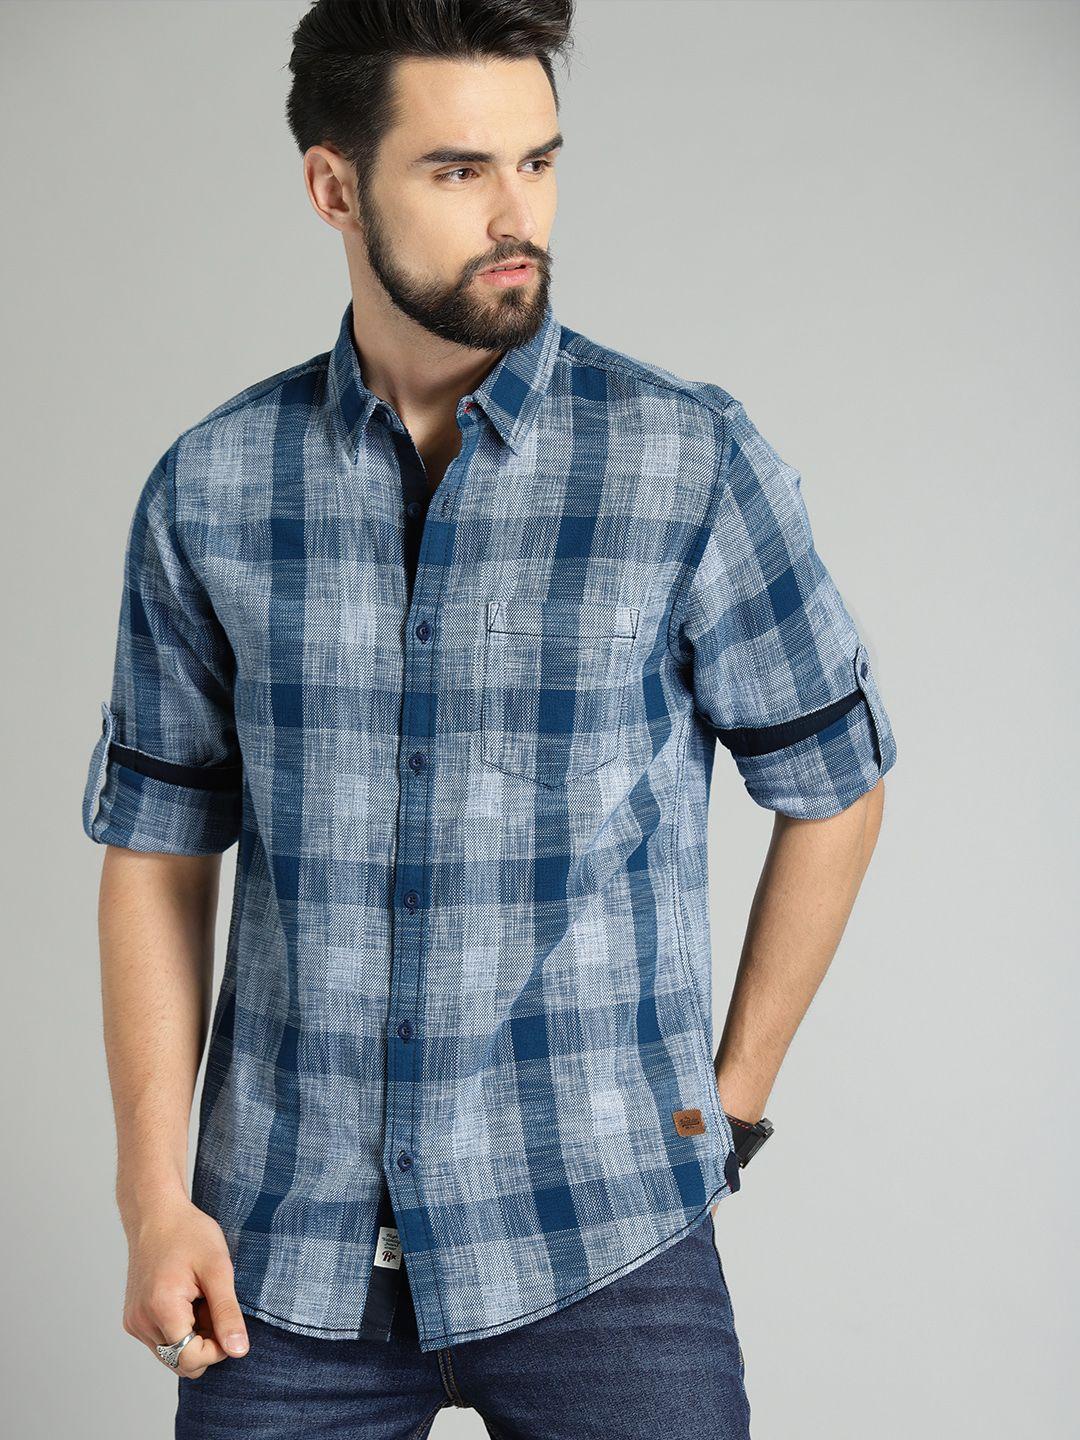 roadster-men-blue-&-white-checked-structured-casual-shirt